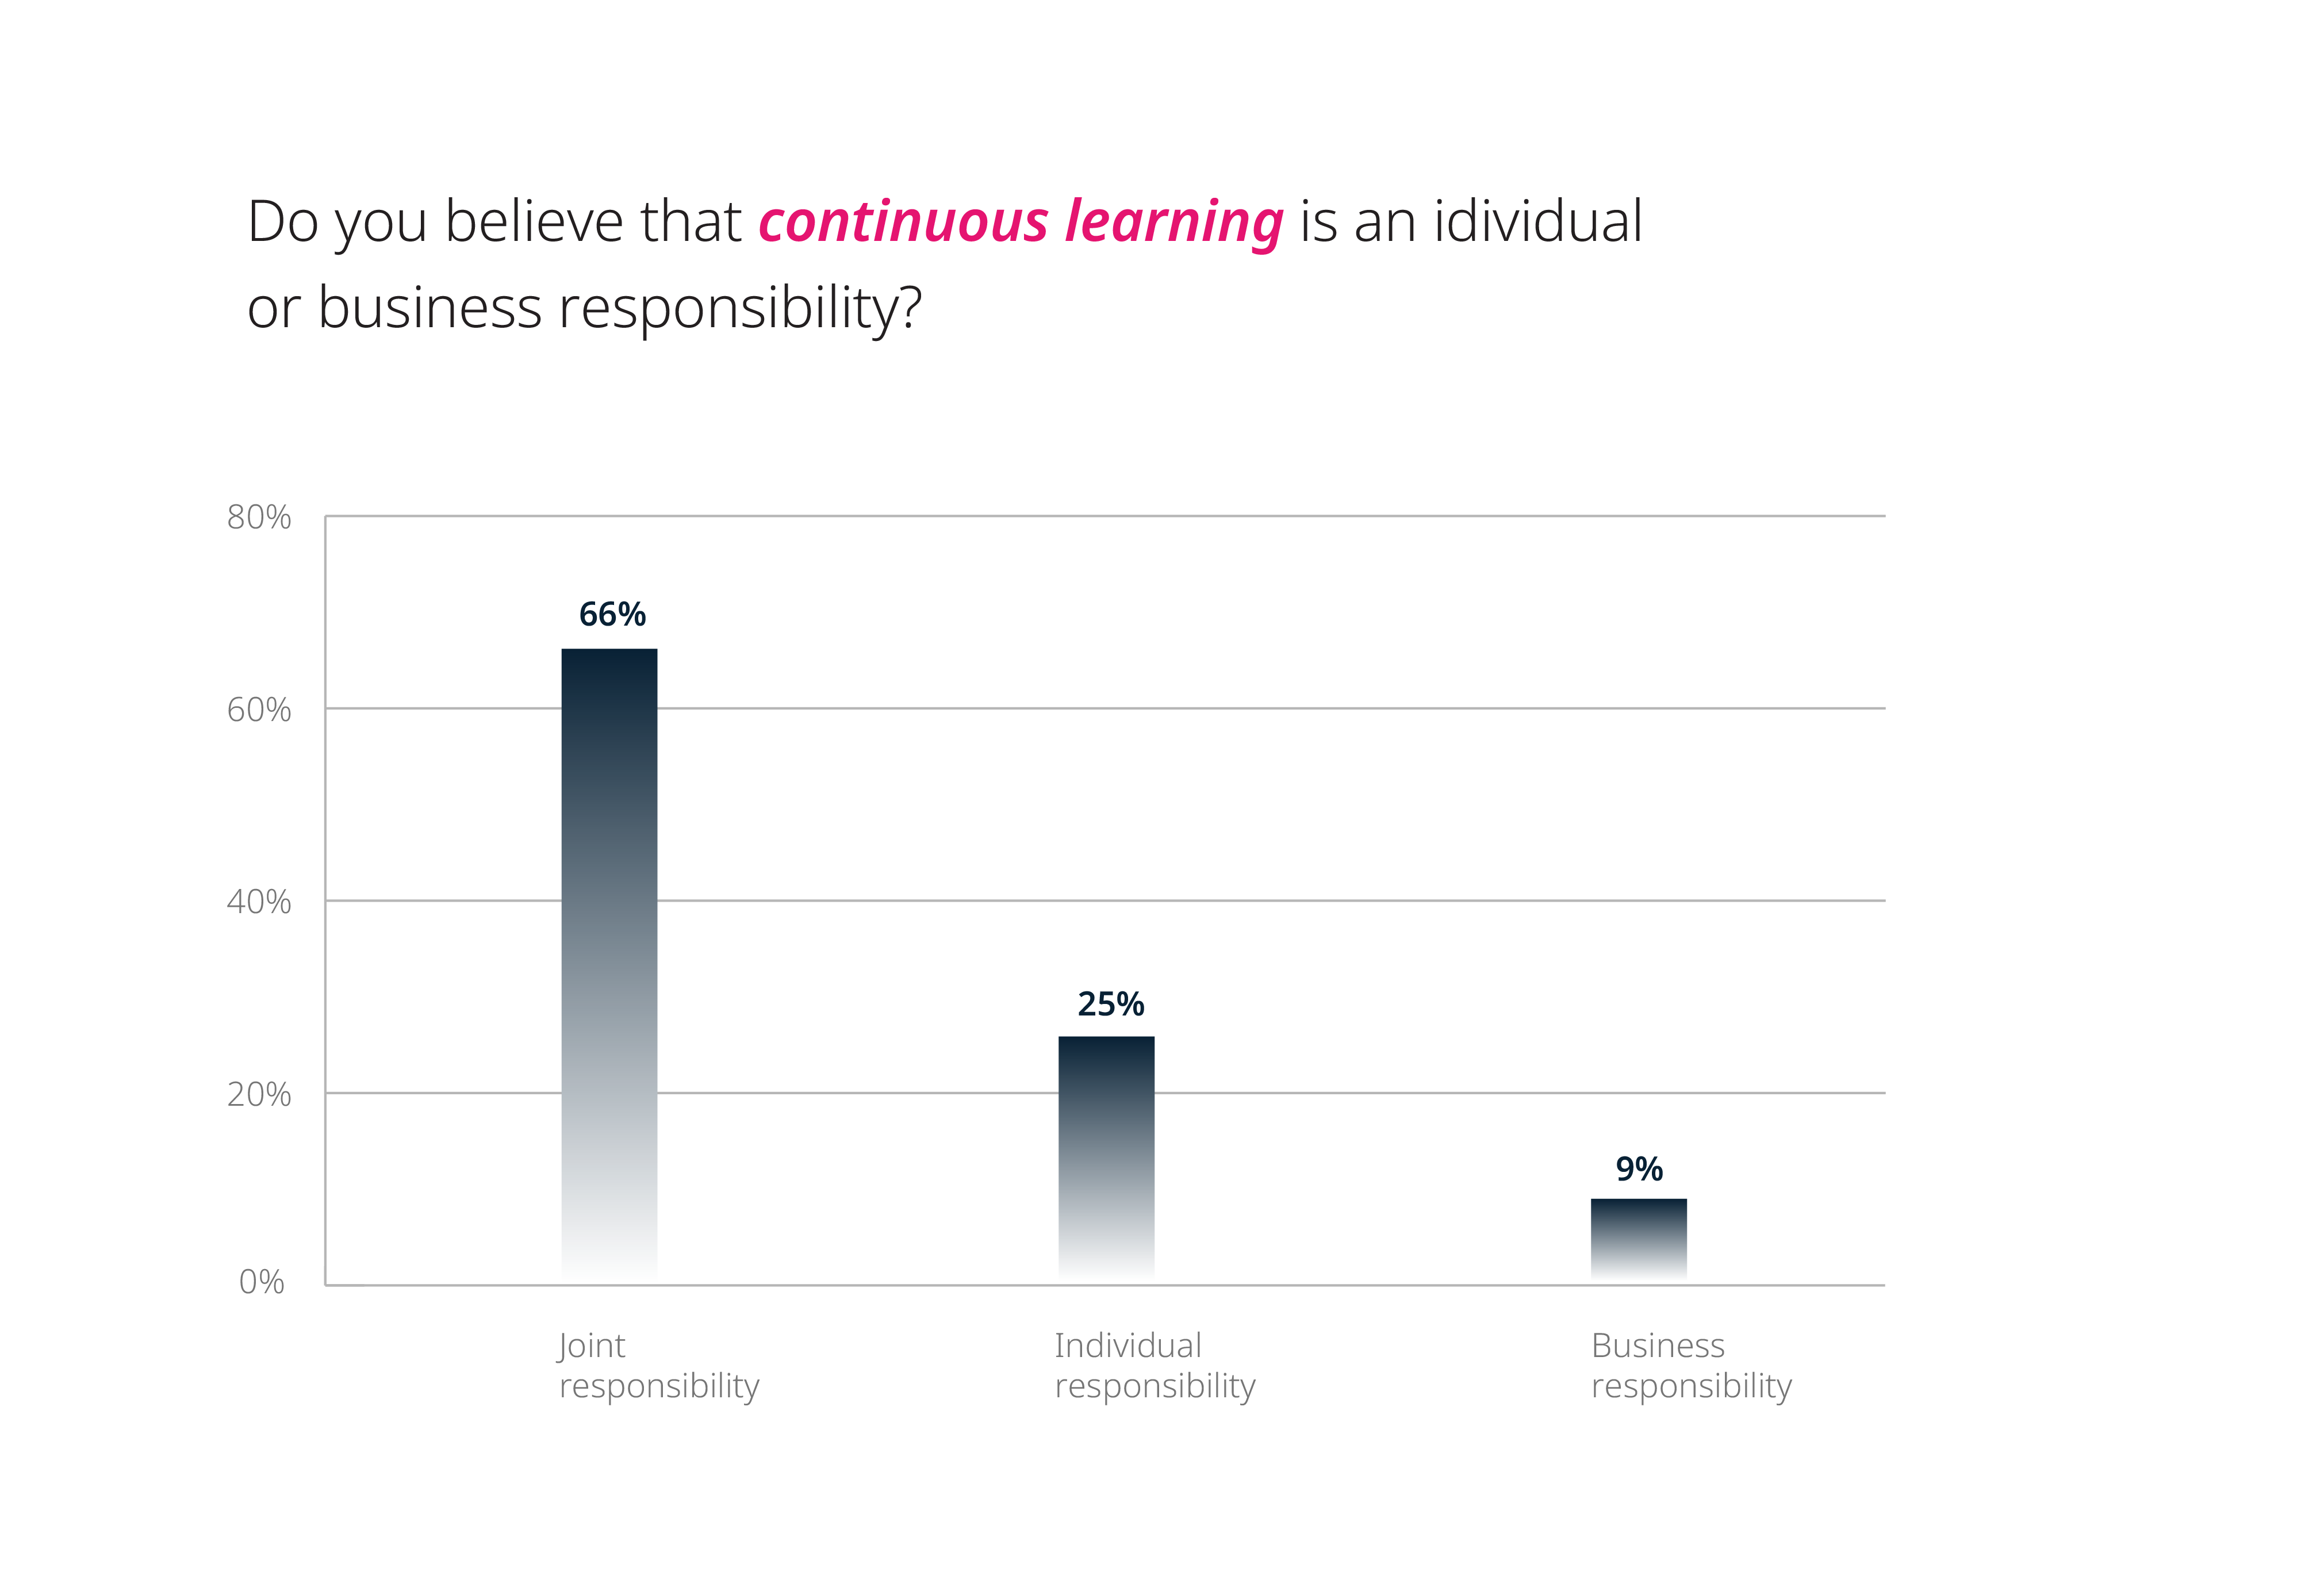 Do you believe that continuous learning is an individual or business responsibility? Percentage breakdown